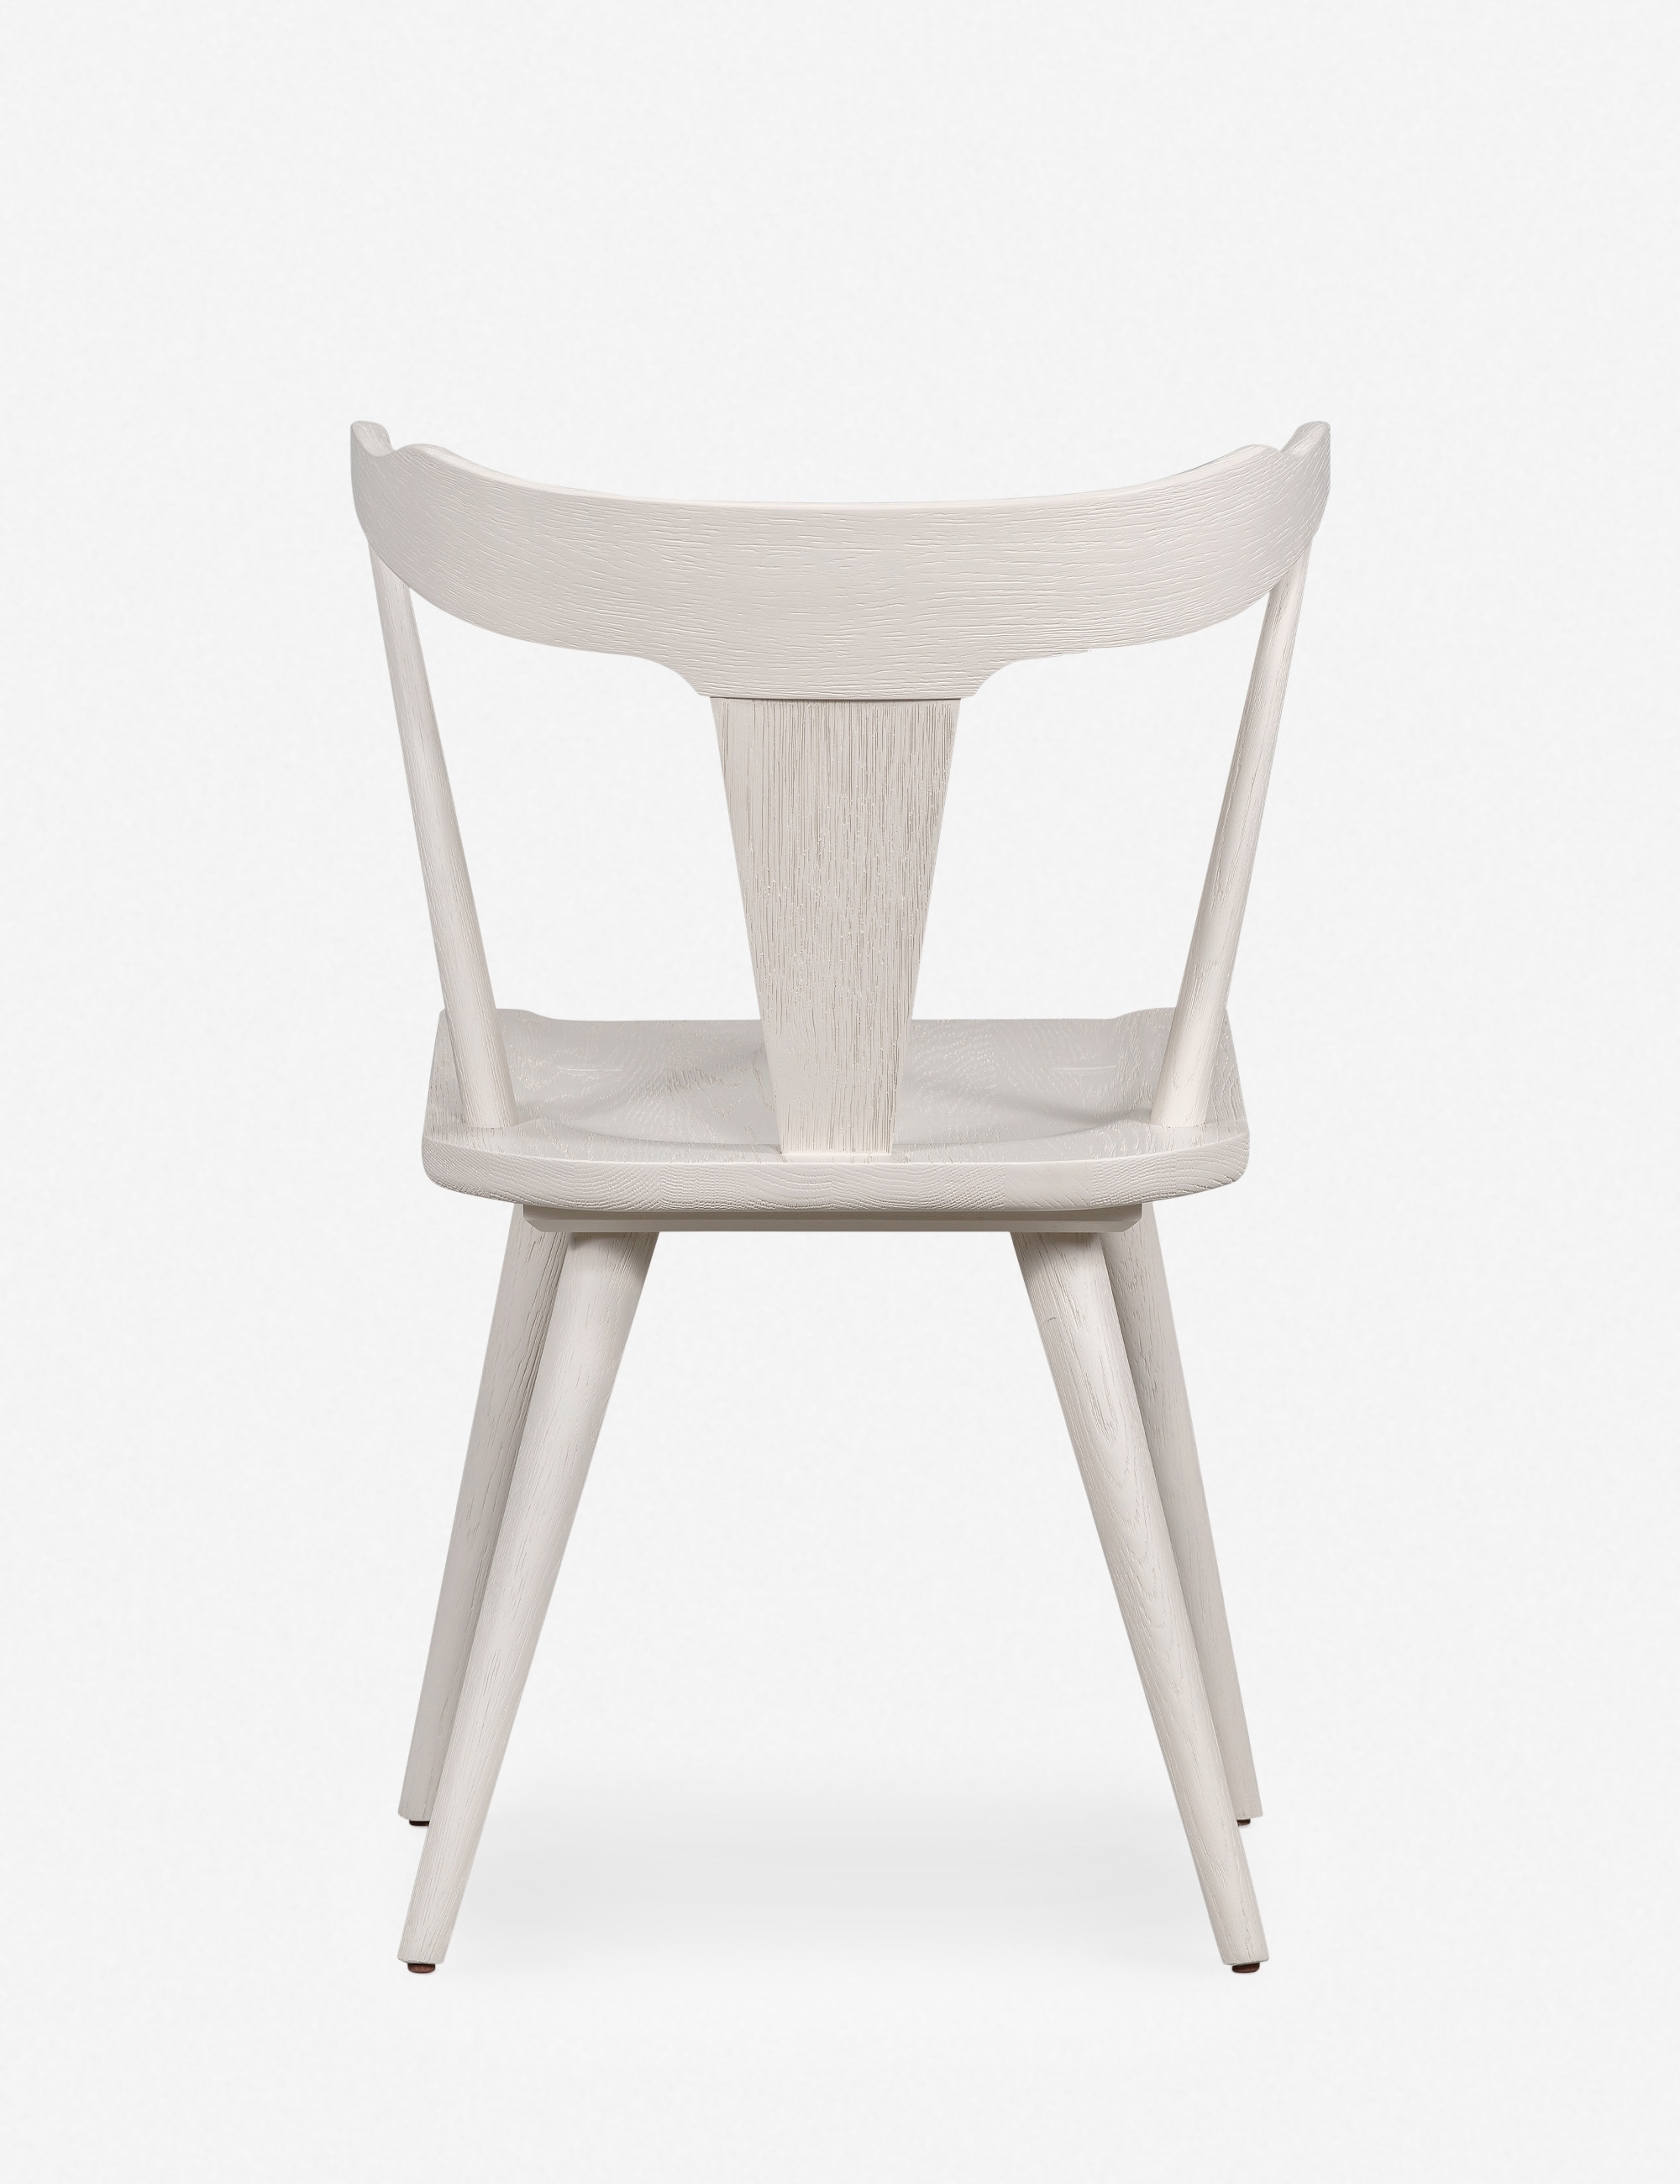 Lawnie Dining Chair - Image 4